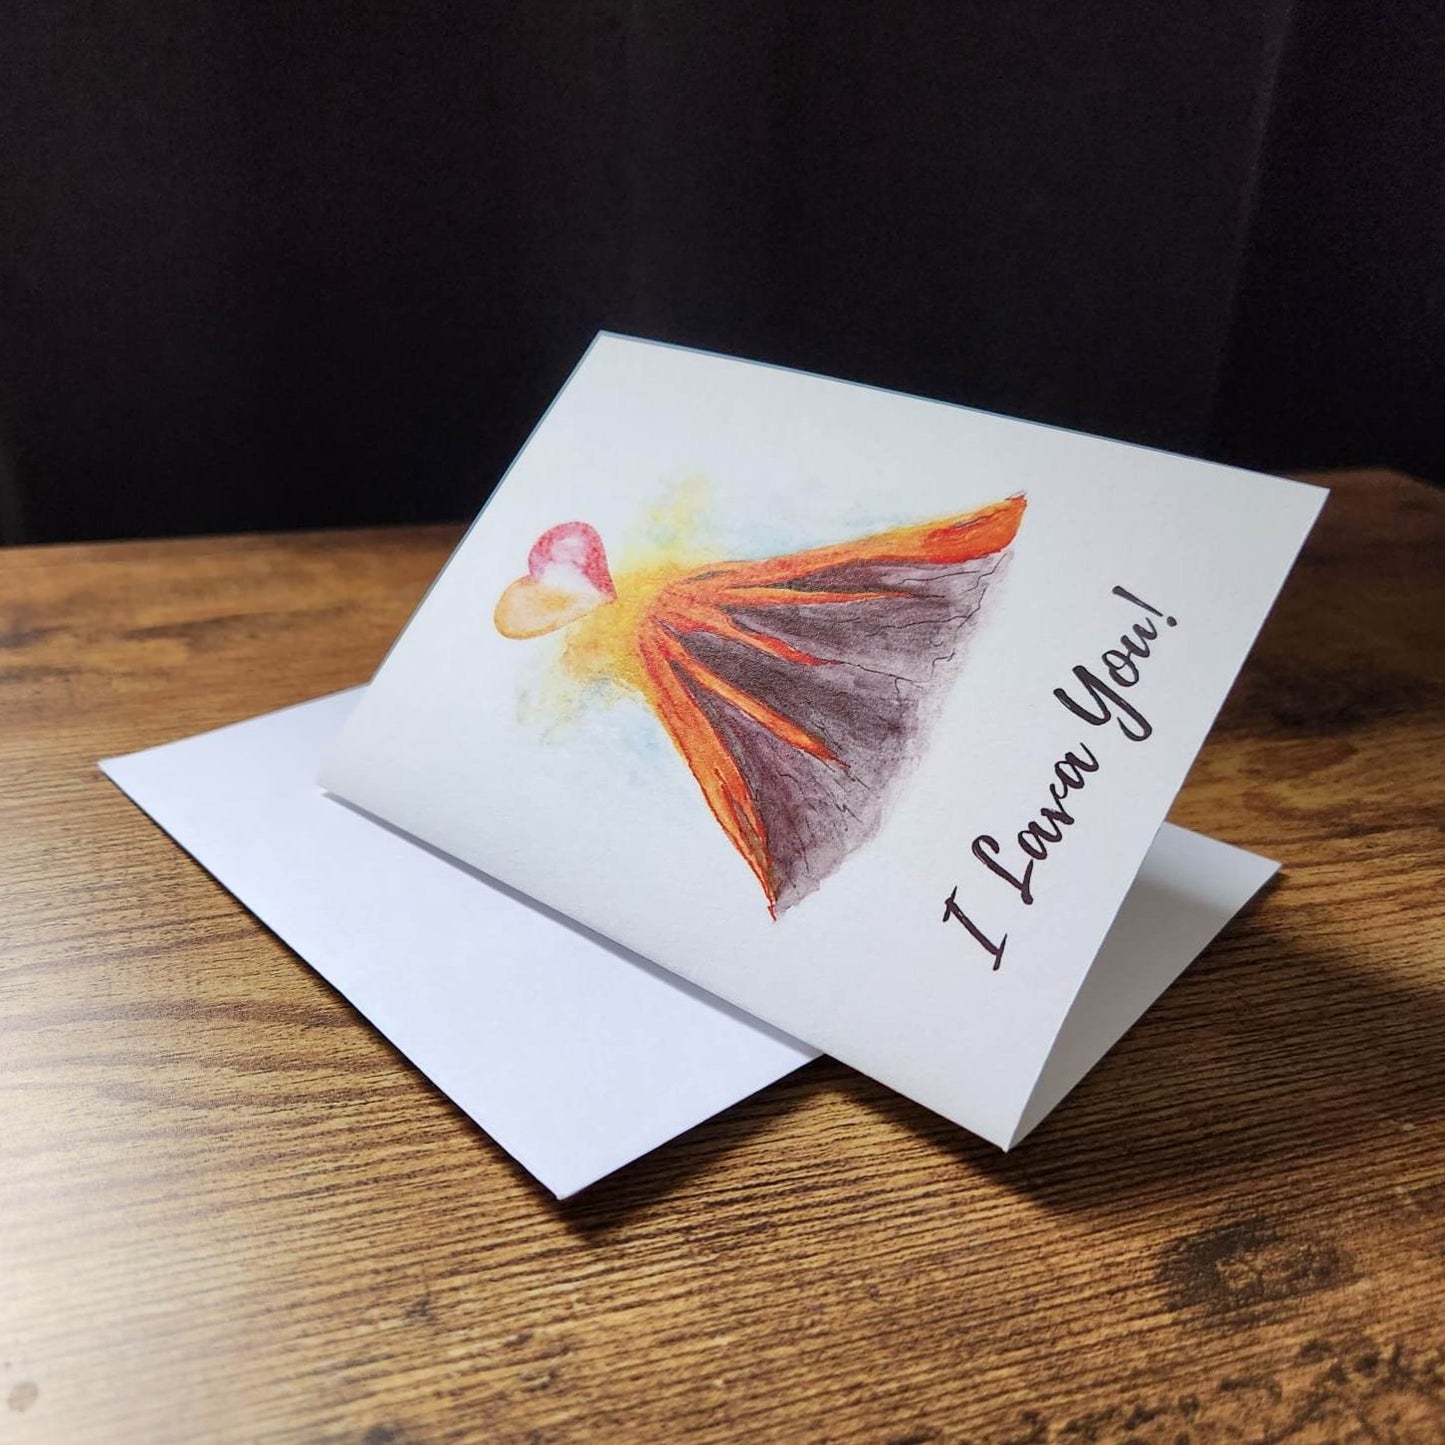 I lava you, I love you card, Lava pun card, Cute Valentine's day card, Sweet anniversary card, Volcano card, Card for Wife,Card for husband